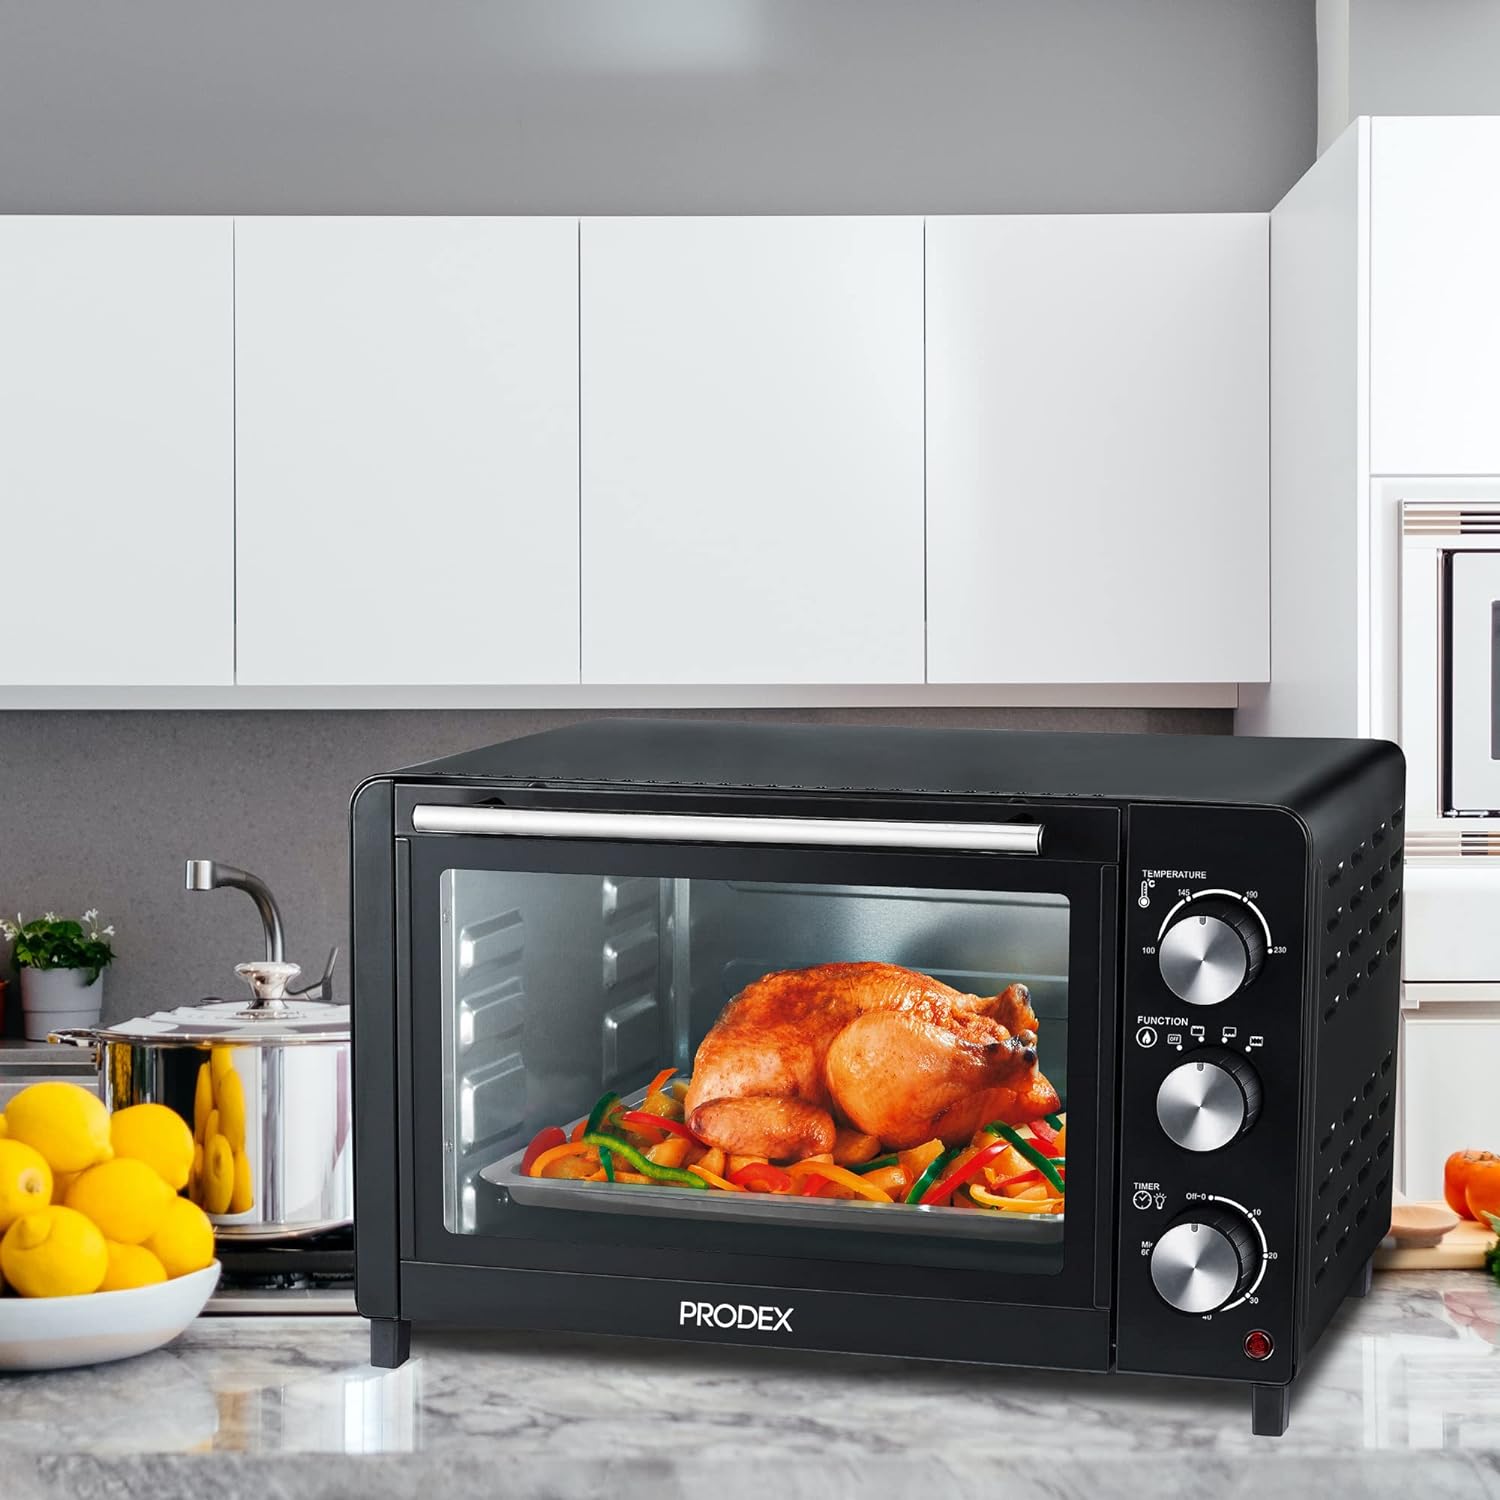 Prodex PX7023B 23 Litre Tabletop Mini Oven, 1500W Electric Cooker & Grill, Ideal for Roasting, Baking, Grilling & Reheating, Temperature Range: 100 - 230°C, Black - Amazing Gadgets Outlet